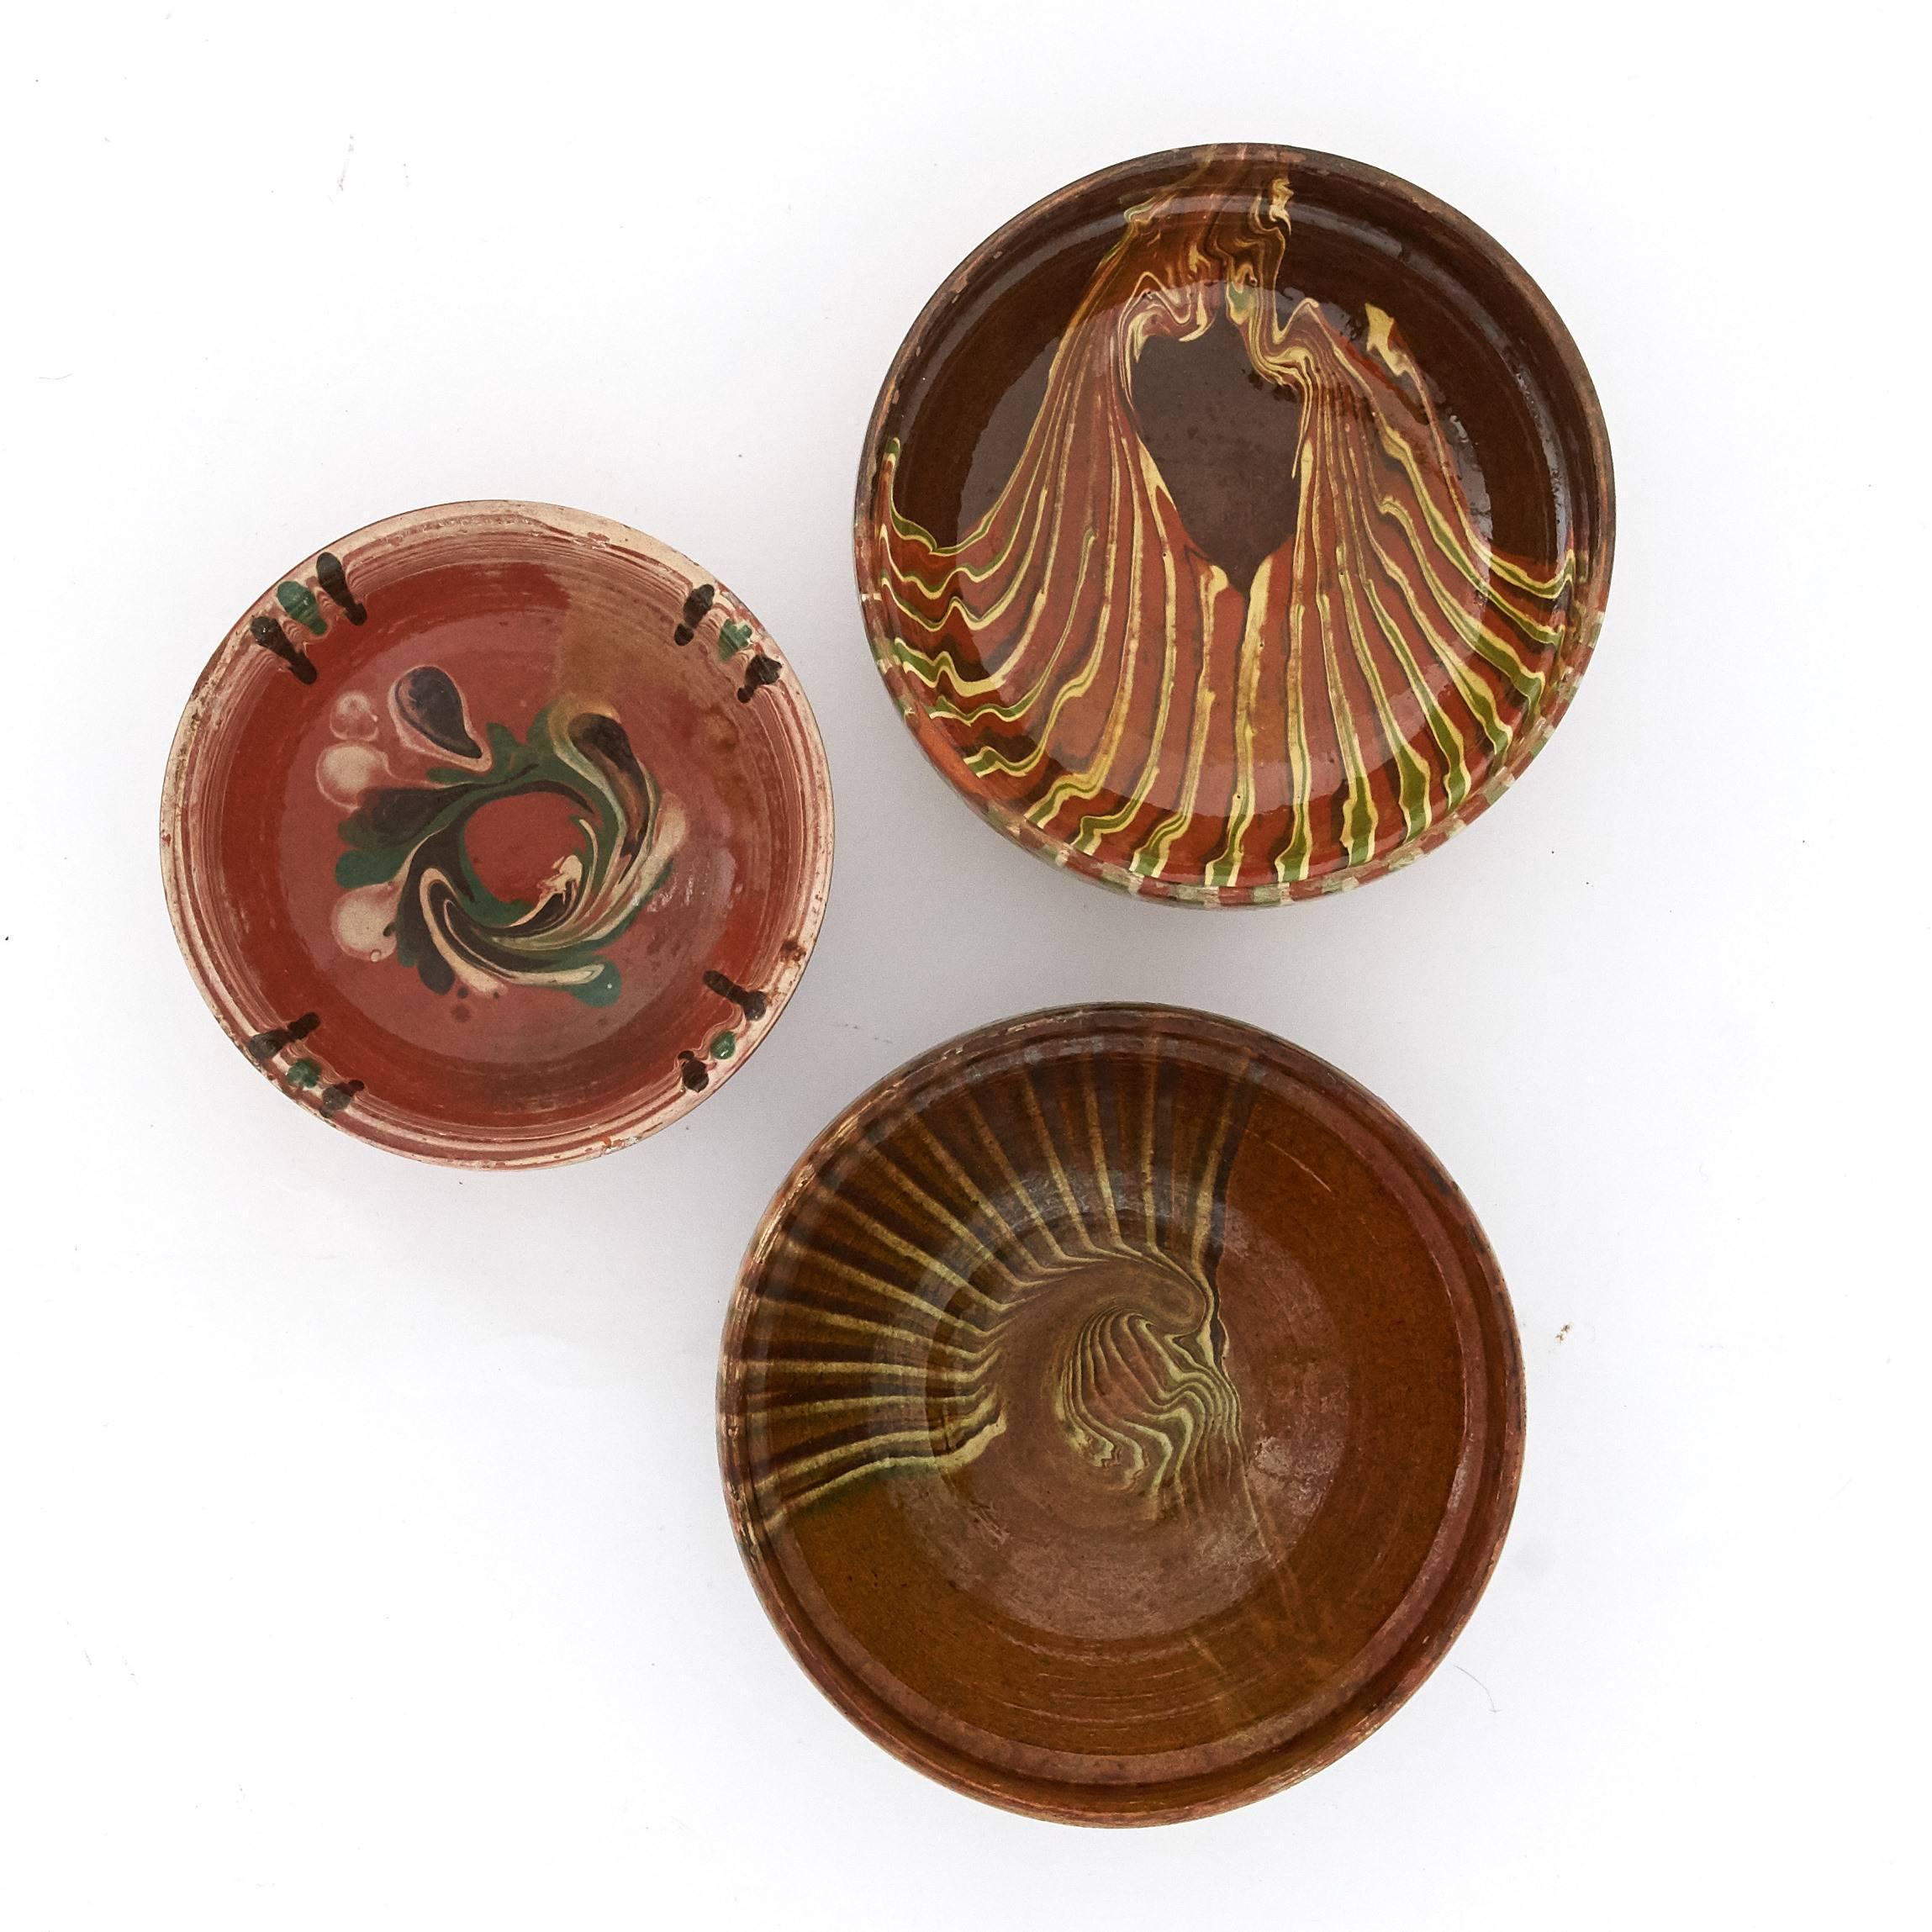 All three bowls were crafted in Romania in the mid-20th century. They are made in terracotta and then glazed and hand-painted with a mix of earthly colors. The technique is the typical paint dripping one used for marbleized ceramics. It is a common